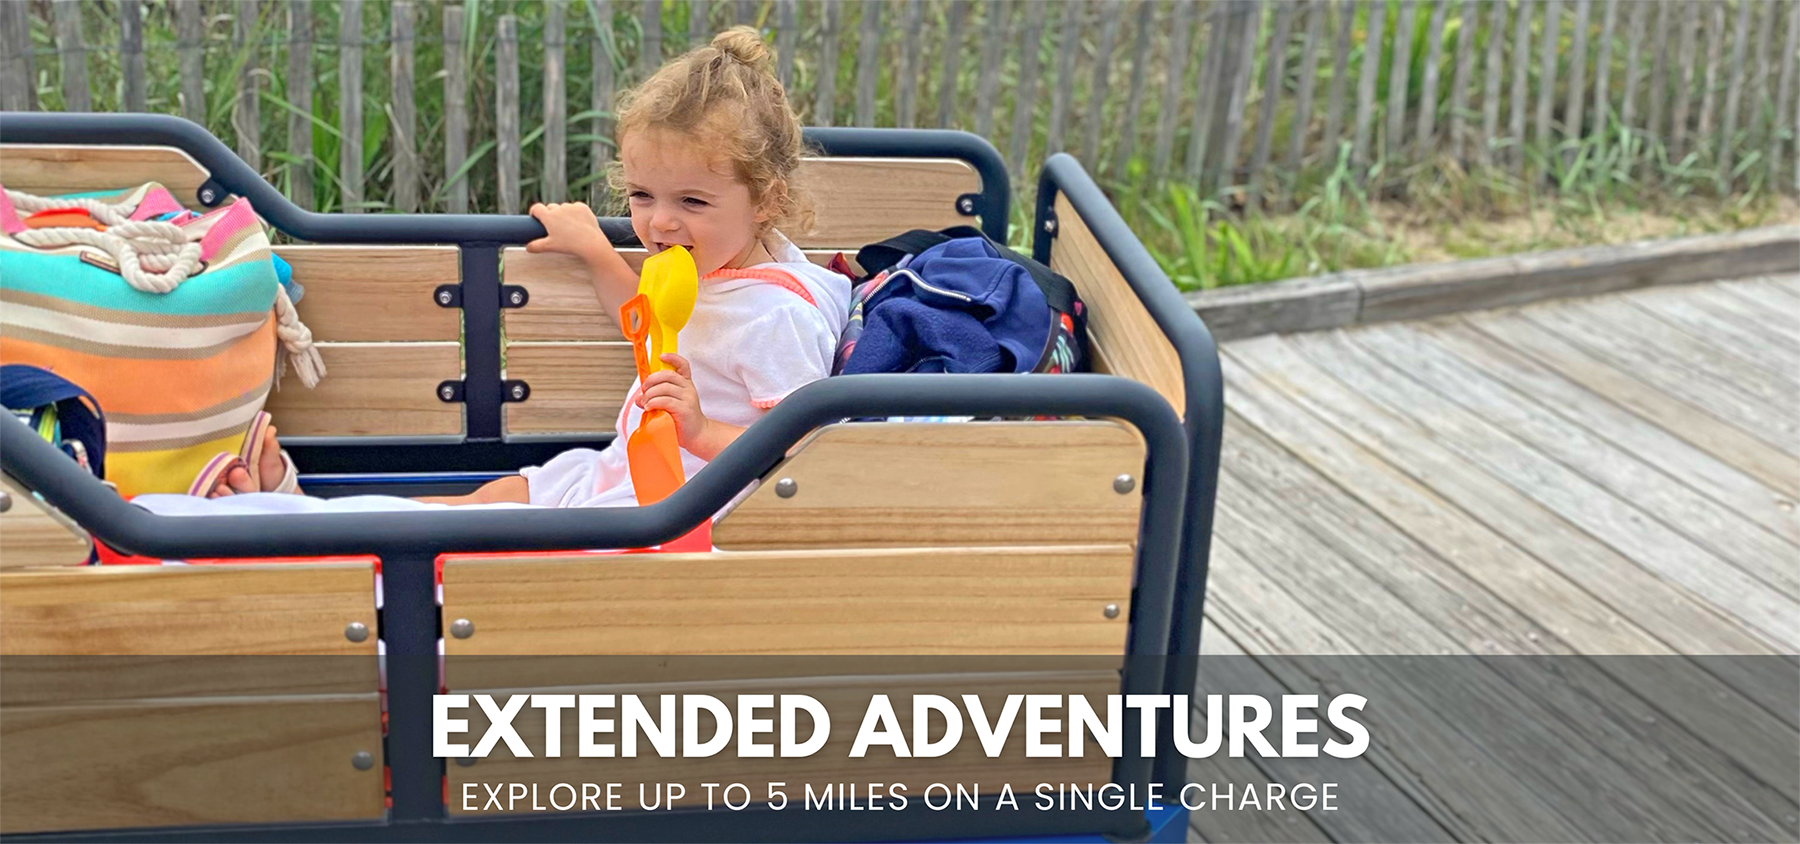 Explore up to 5 miles with an e-Beach Wagon